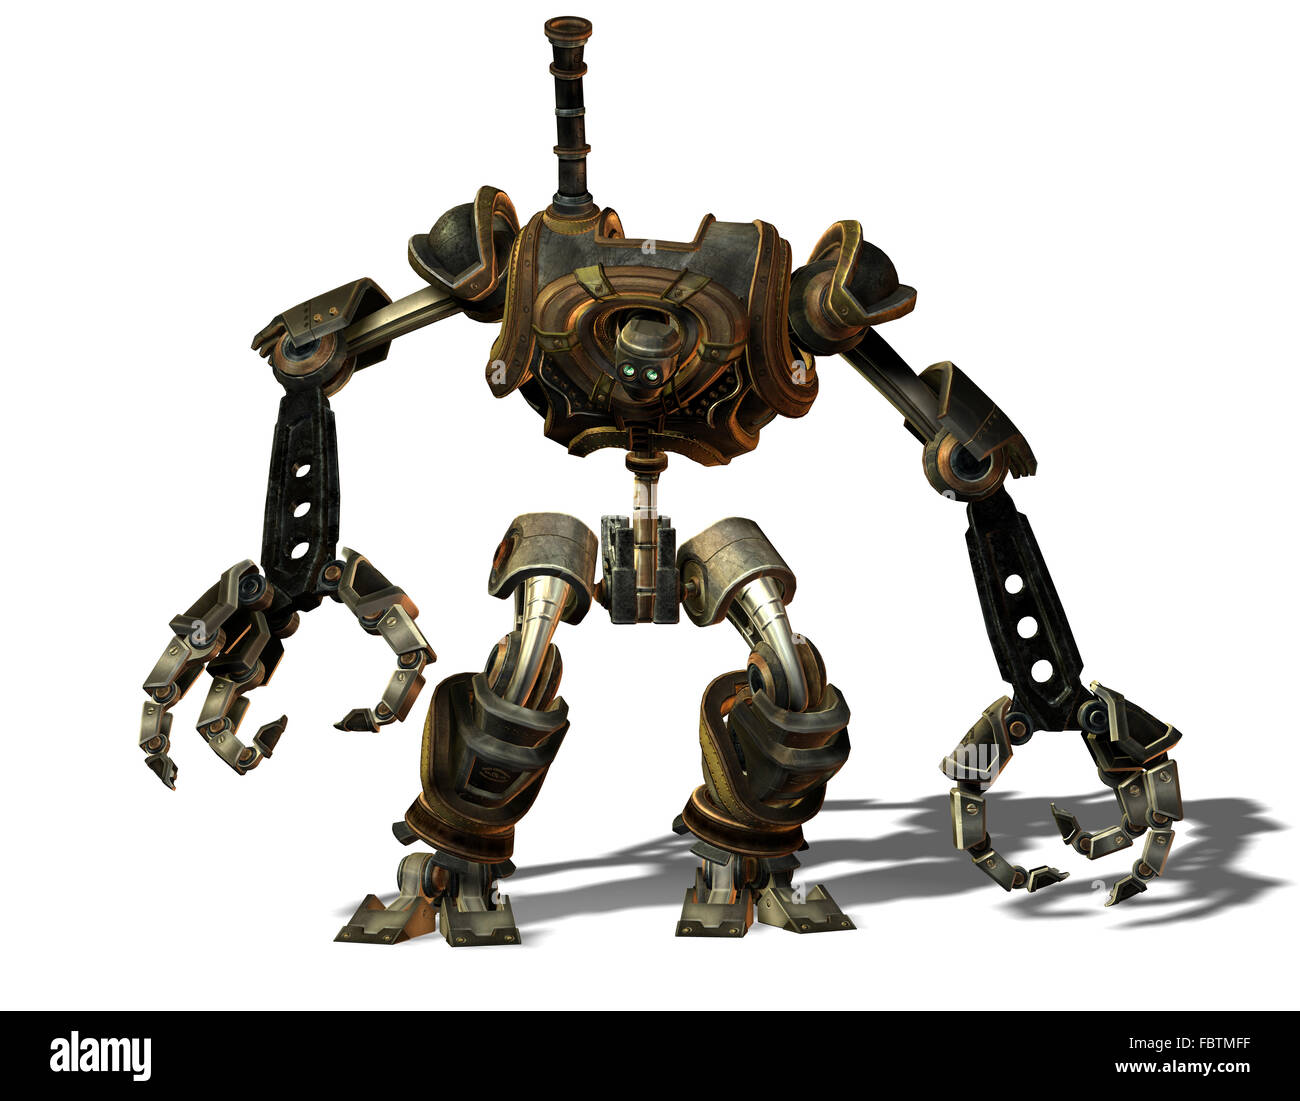 Steampunk robot from the future Stock Photo - Alamy